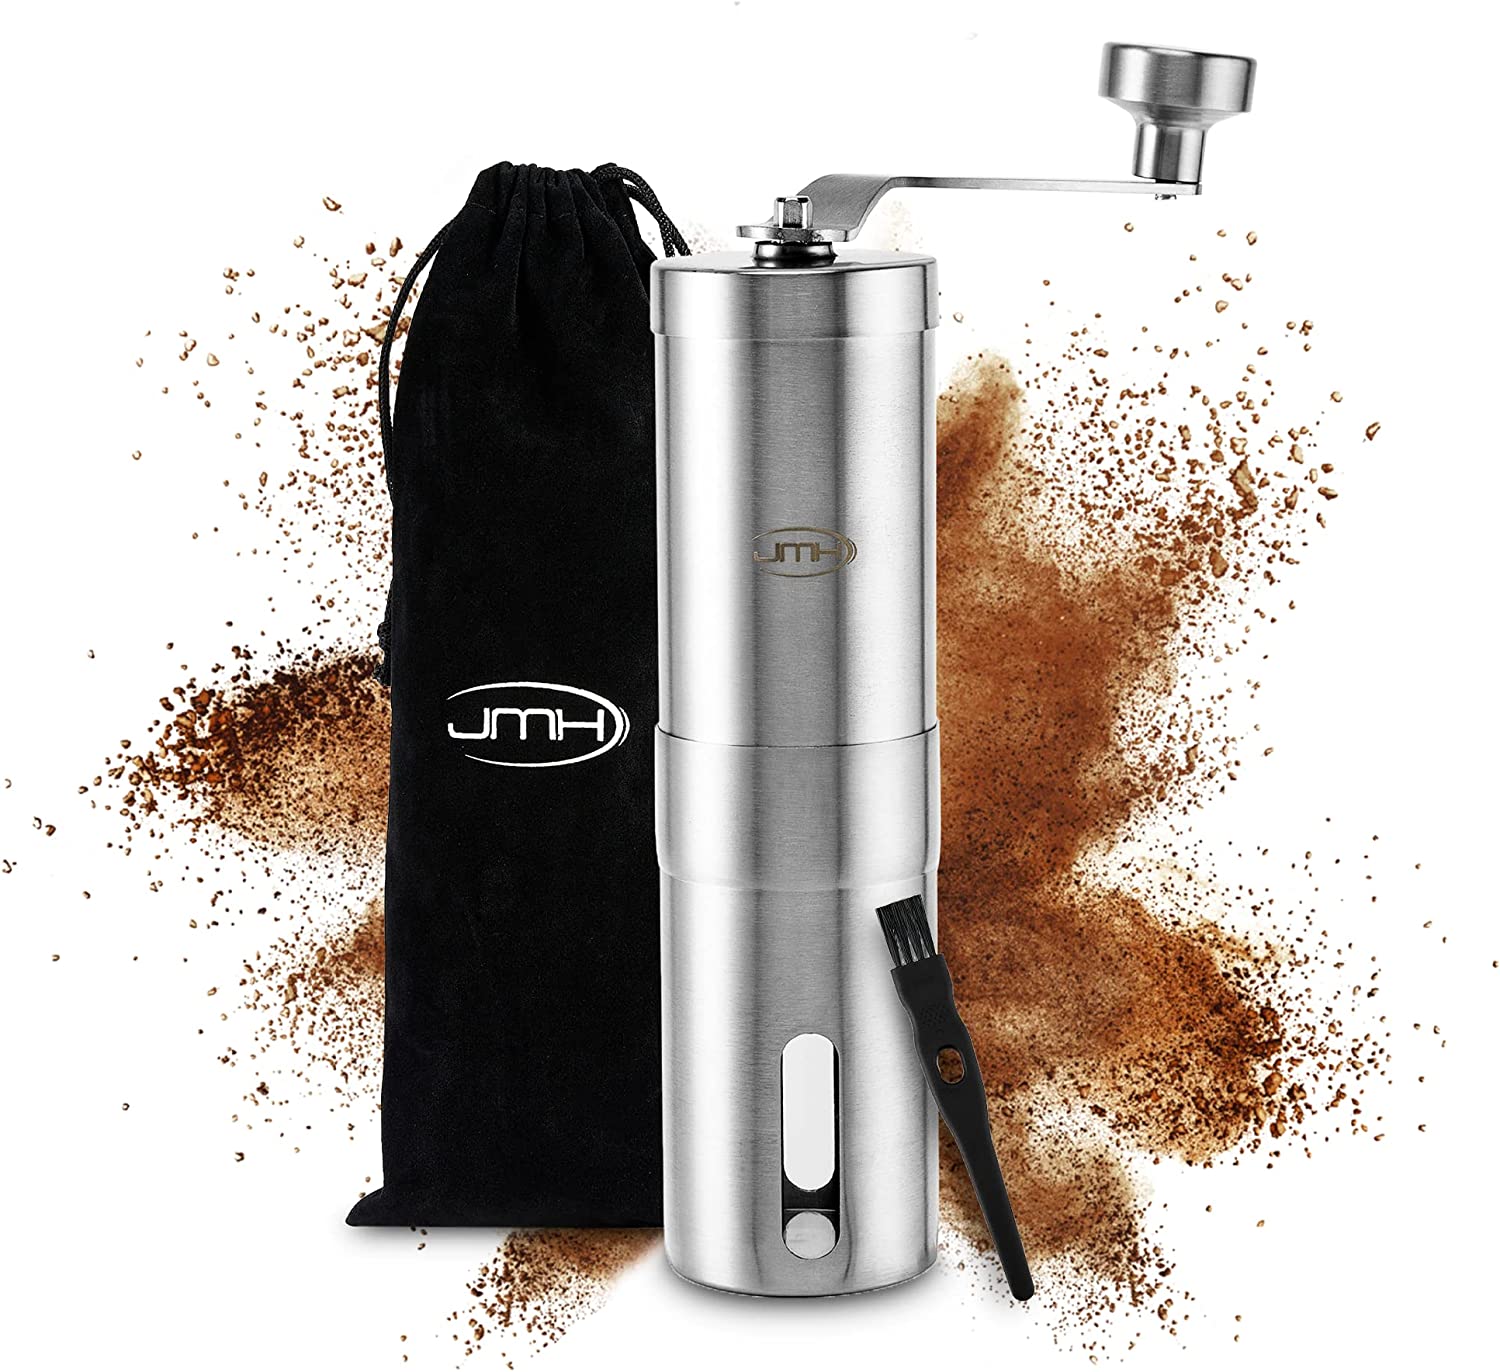 JMH Coffee Grinder Manual Cone Grinder (Adjustable Grinding Level) - Stainless Steel Coffee Grinder With Brush - High Quality Coffee Grinder Hand - Hand Coffee Grinder